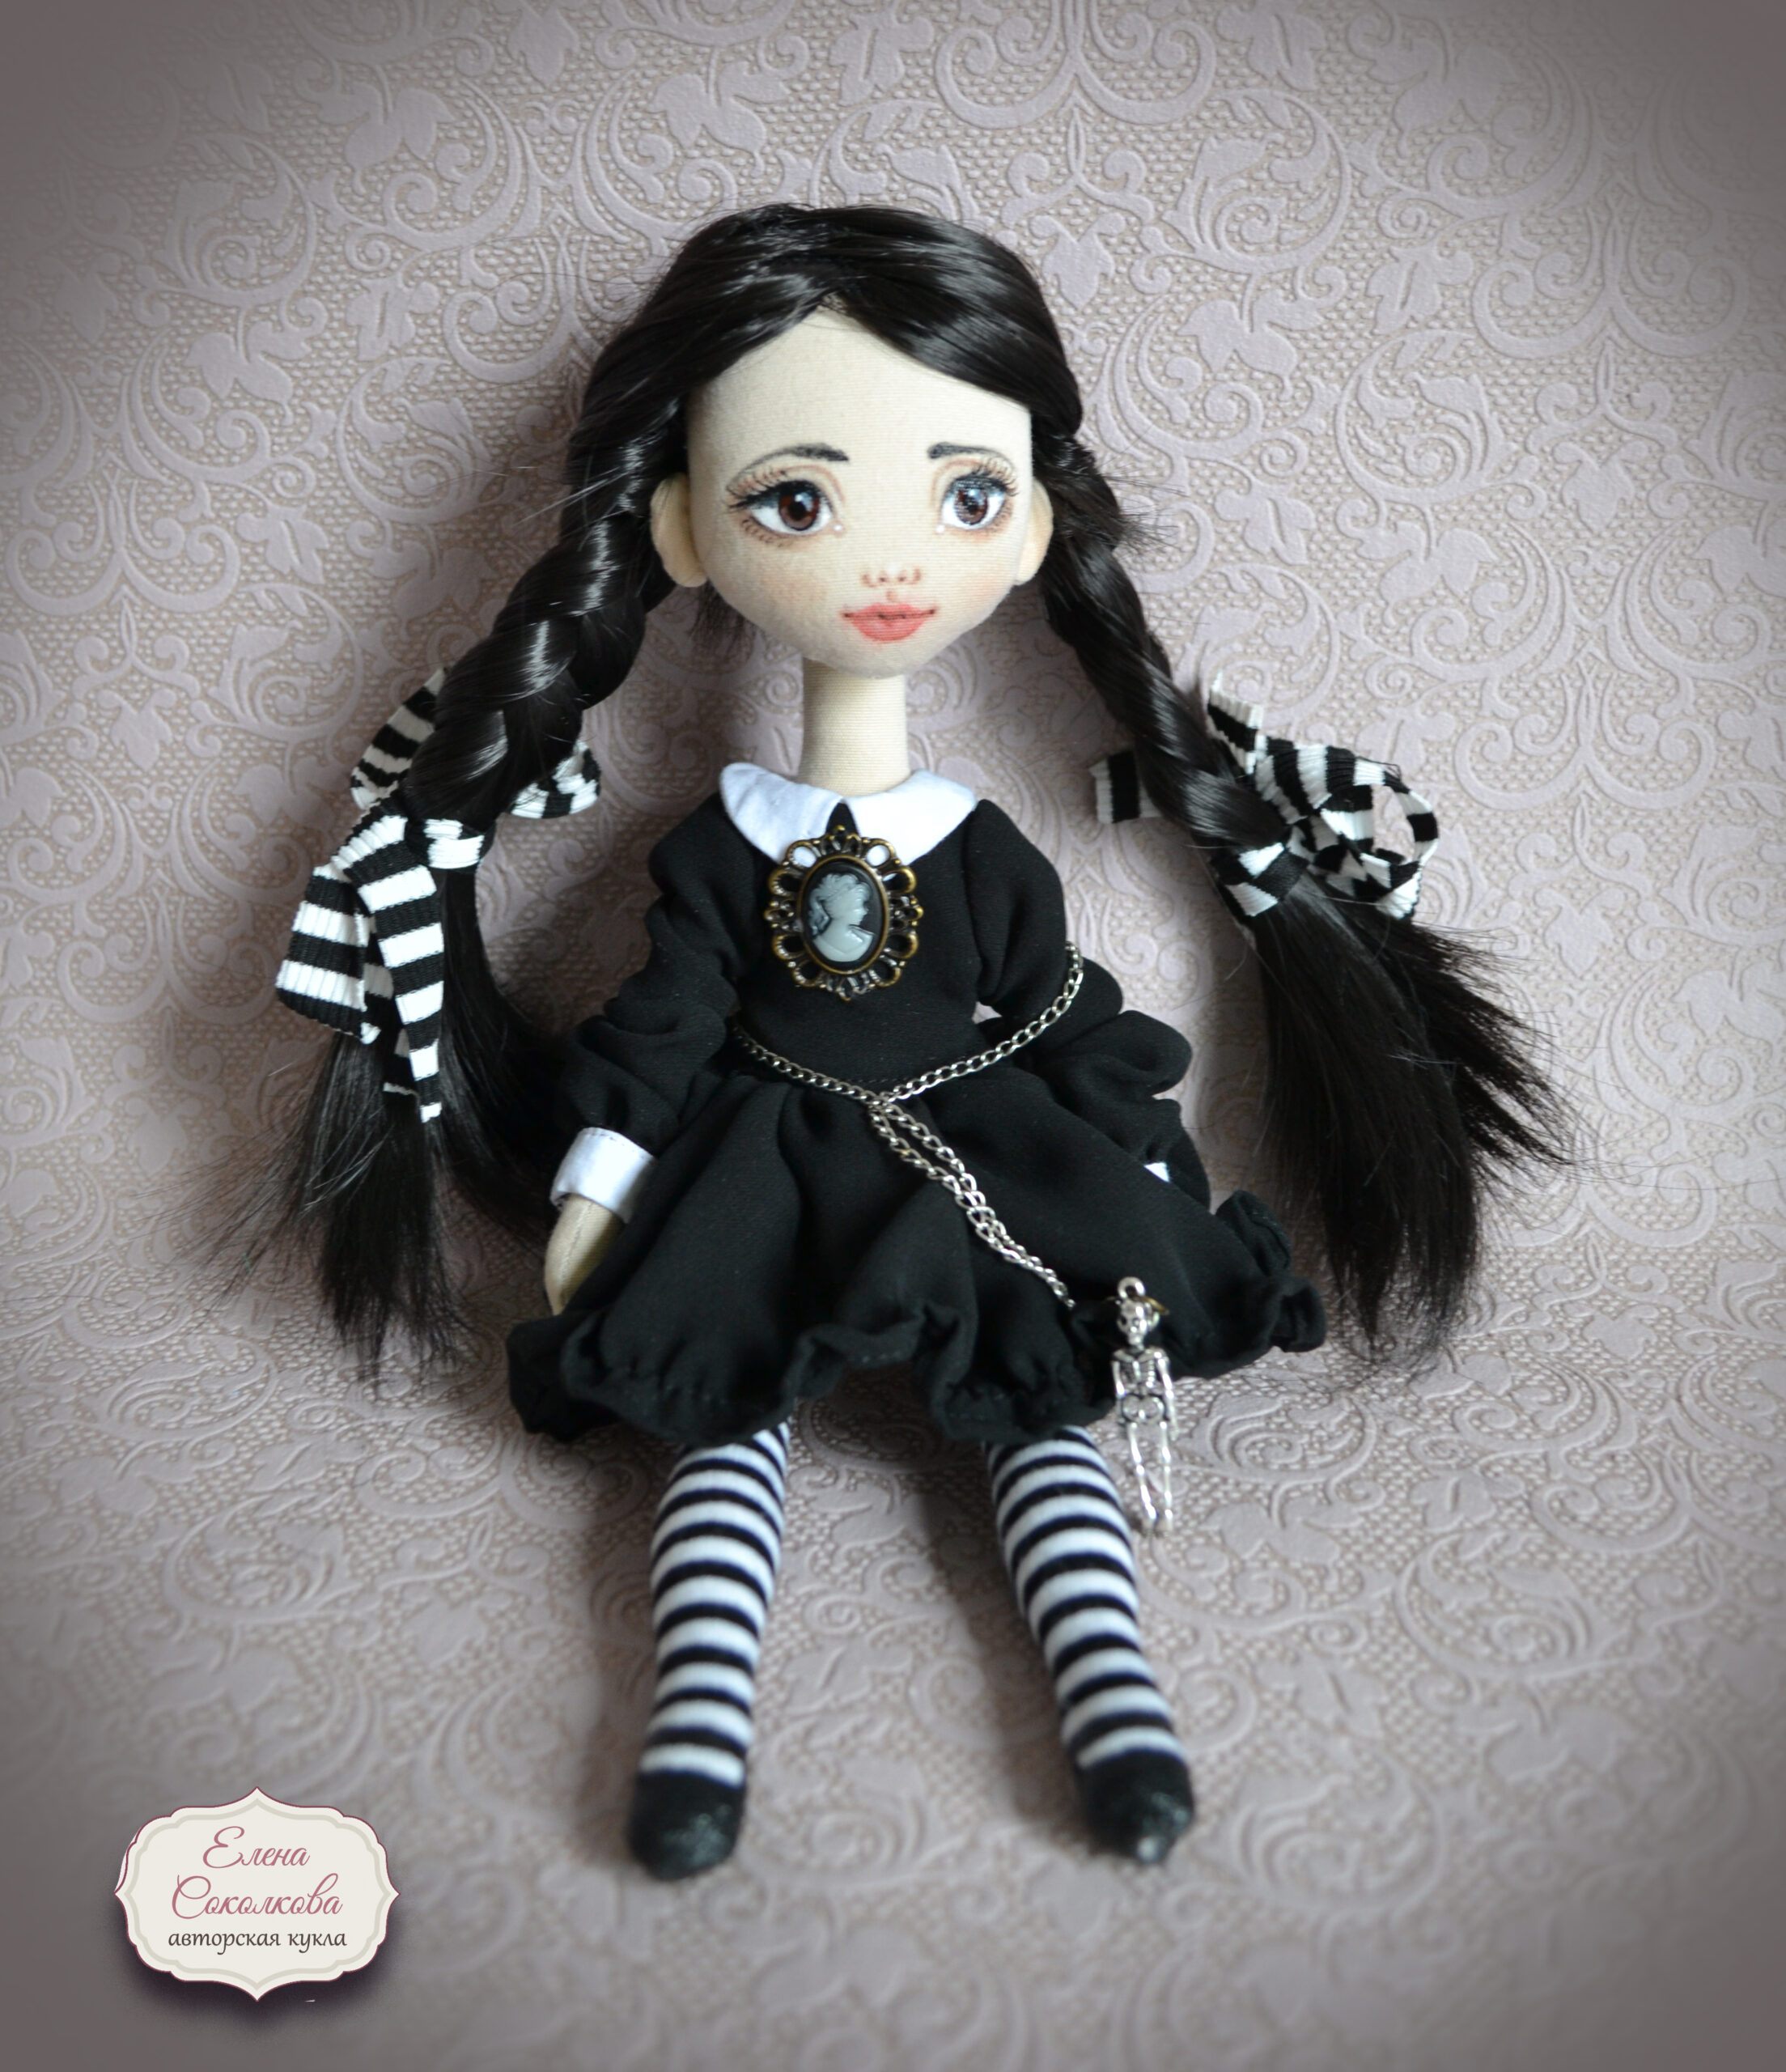 Handmade Doll Clothes Wednesday Addams Dress fit 18" American